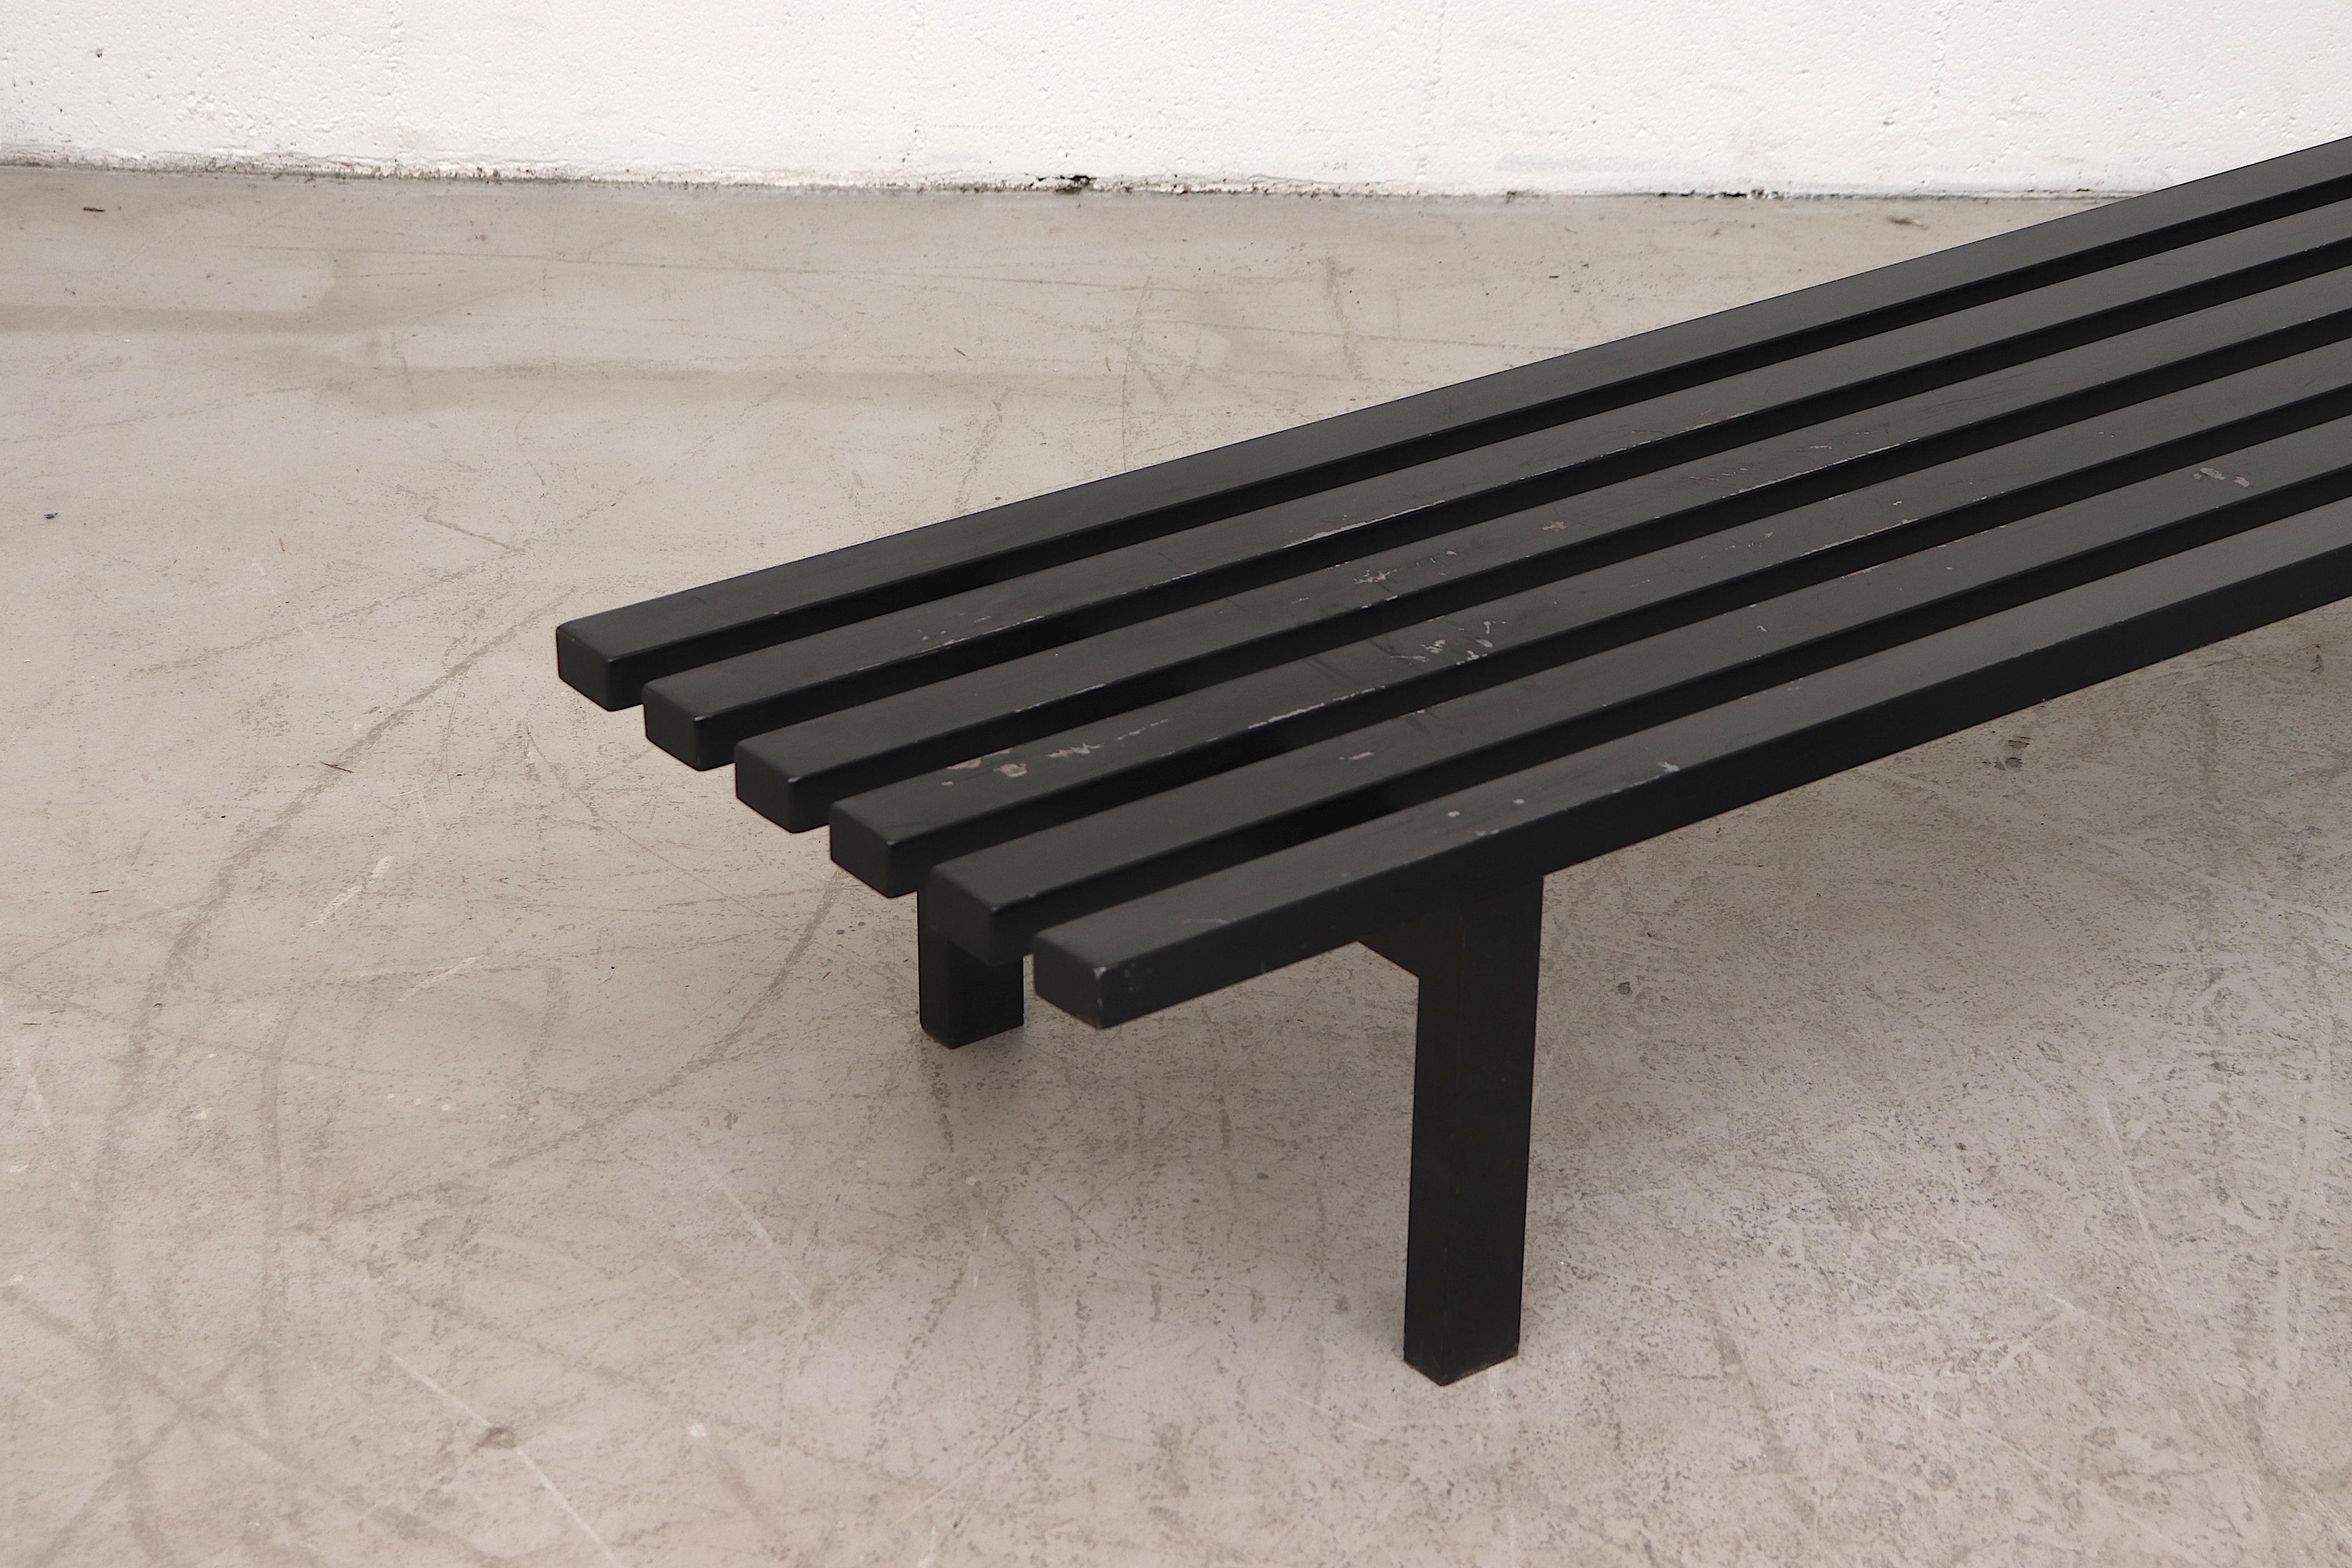 Large martin Visser style industrial slat benches in black enameled metal. In very original condition with visible enamel wear and scratching. Priced individually. Similar smaller benches in brown enameled metal (LU922418079391) Also available.